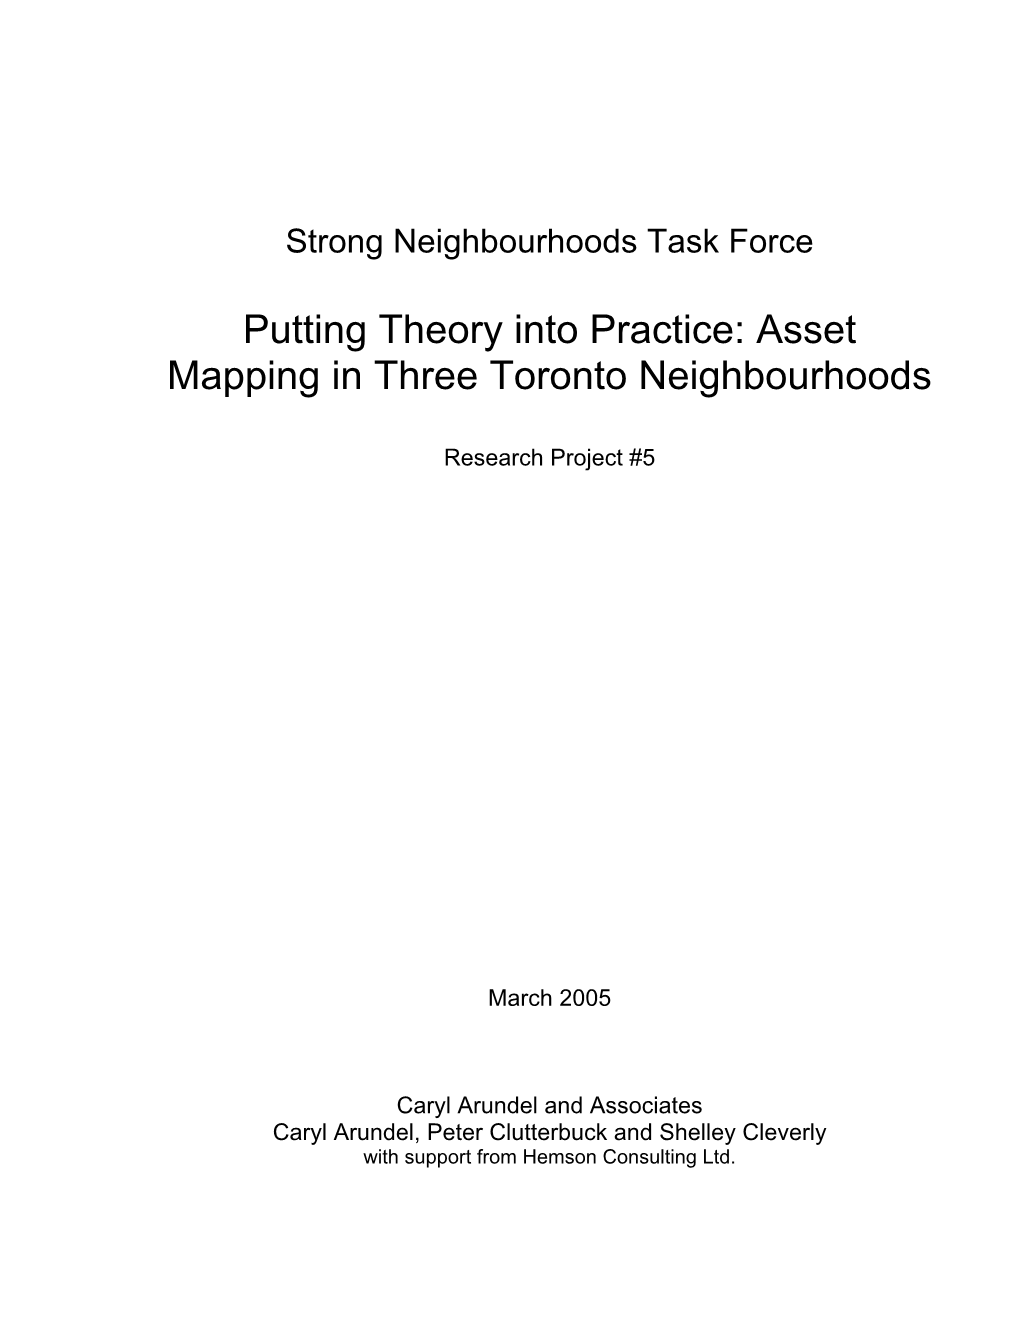 Putting Theory Into Practice: Asset Mapping in Three Toronto Neighbourhoods